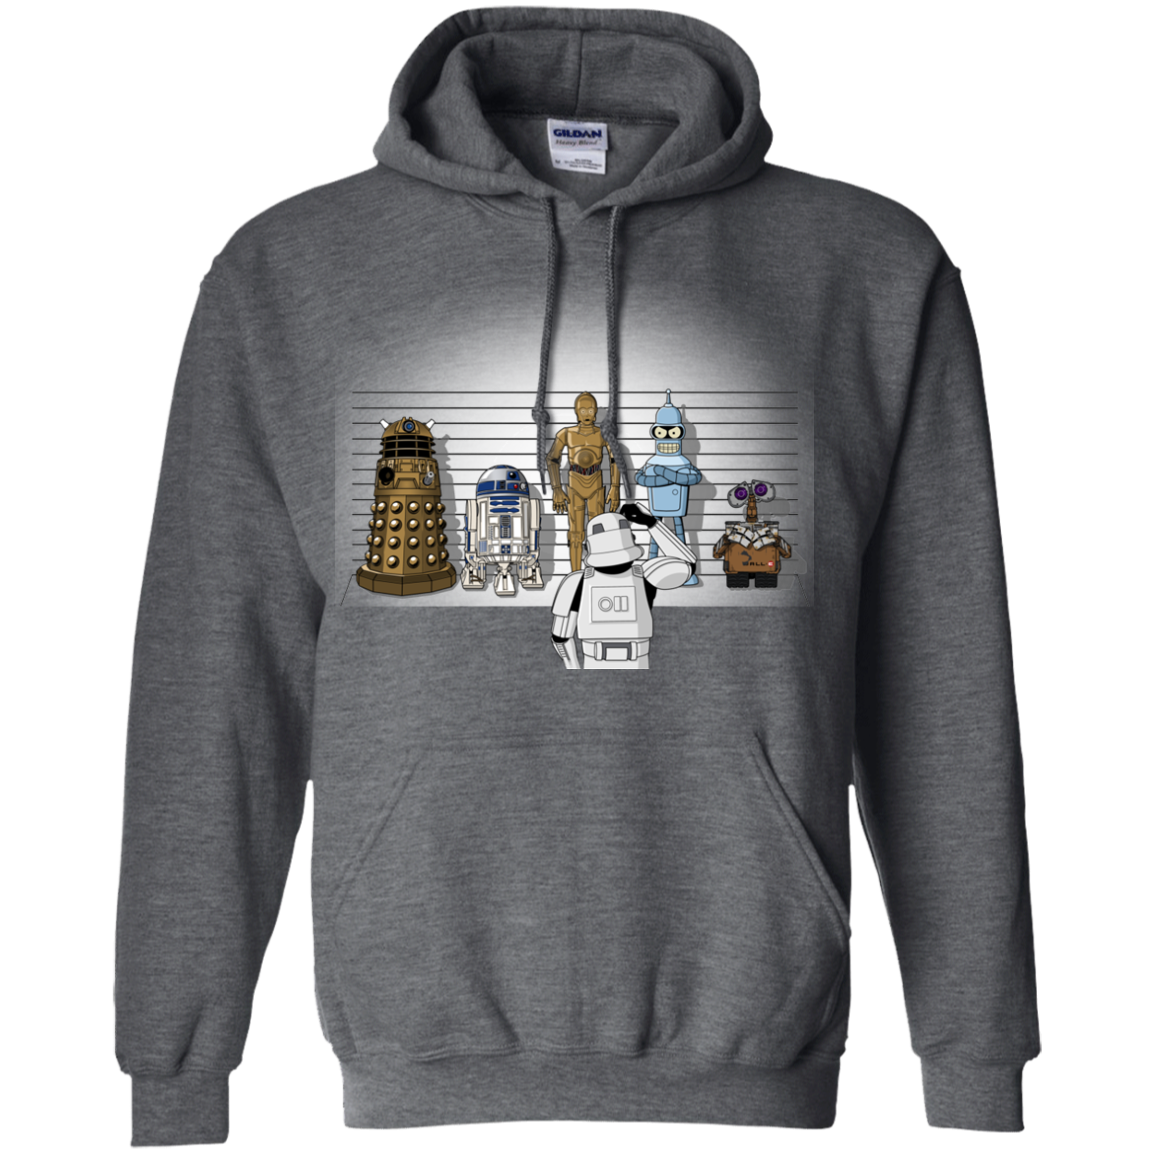 Are These Droids Pullover Hoodie